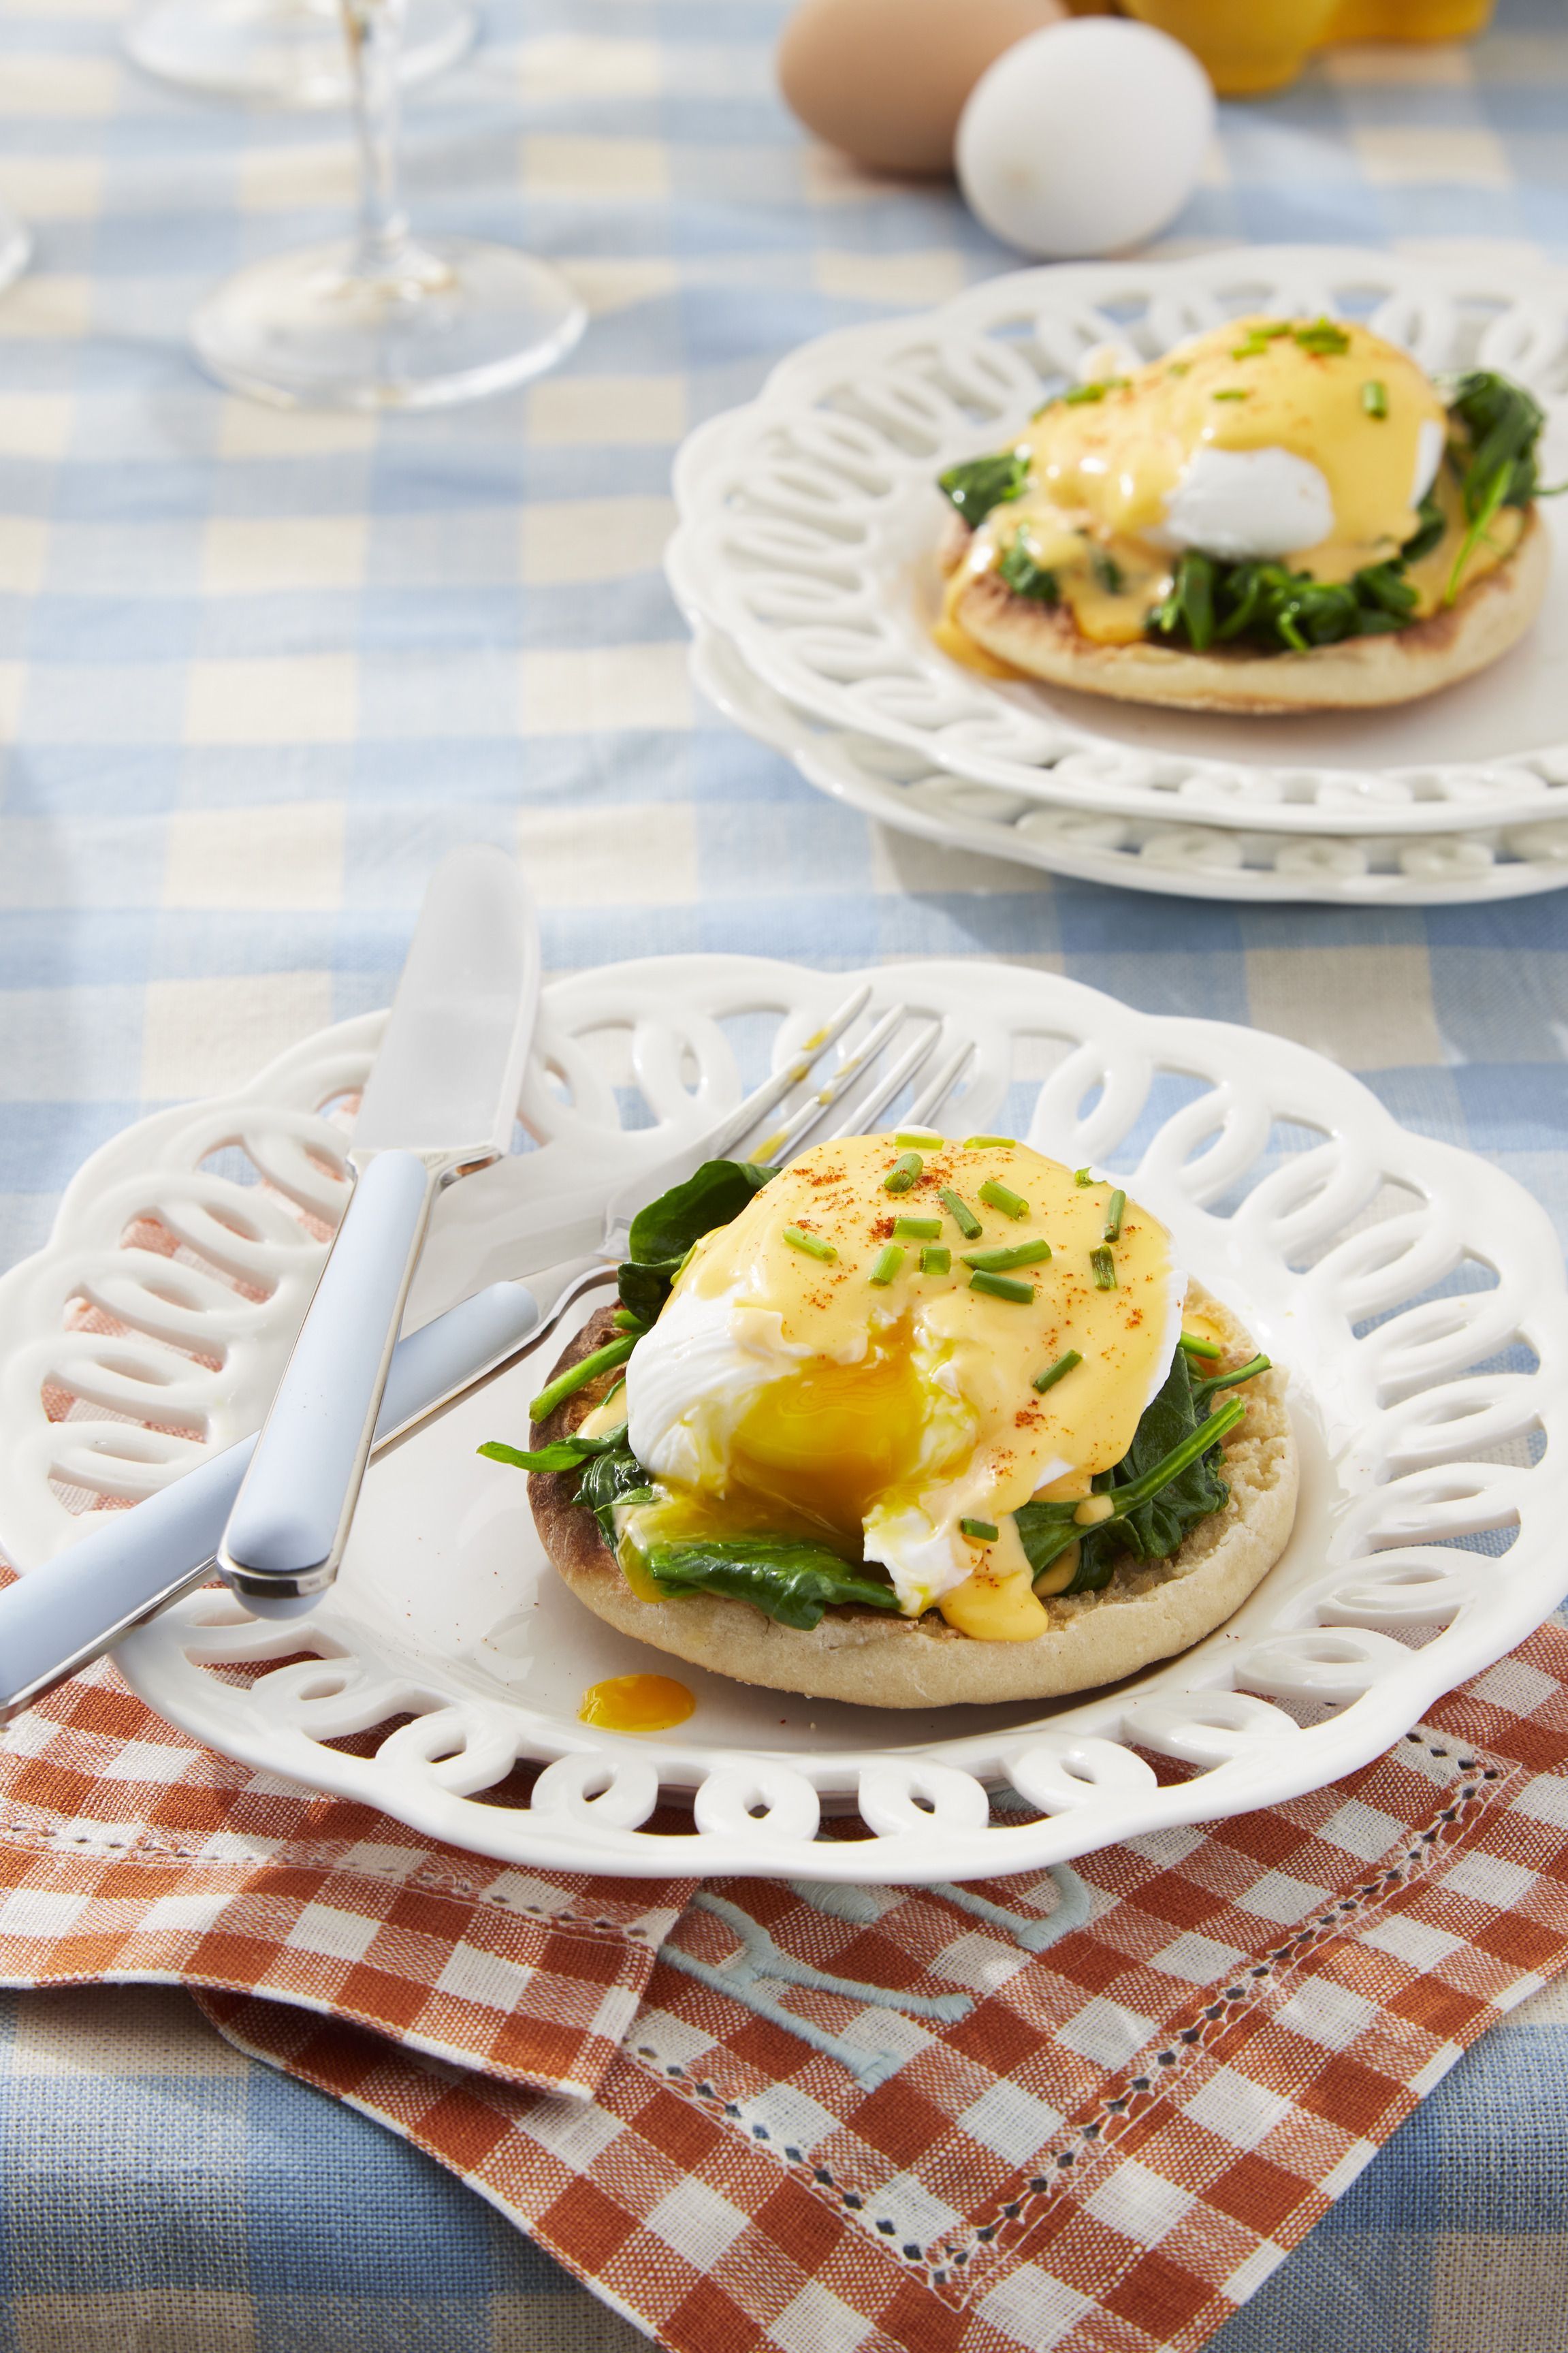 Easter Brunch ideas that are fabulously simple and easy!